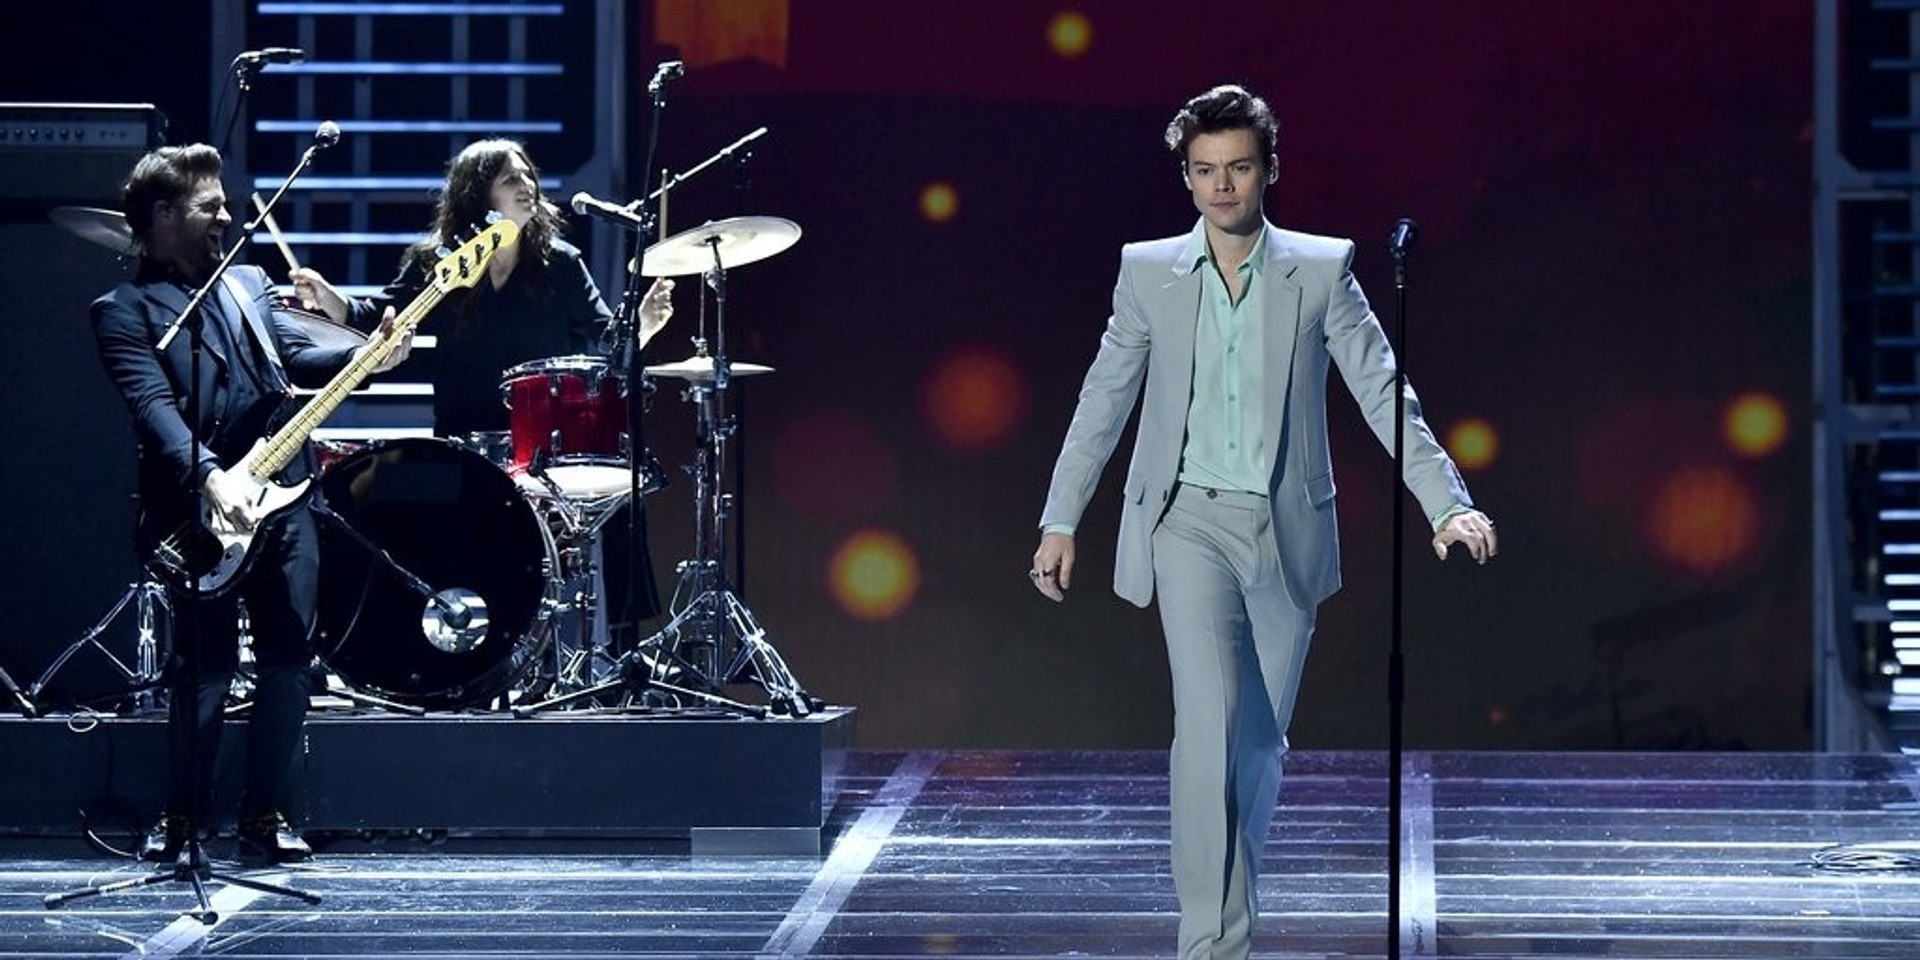 Harry Styles steals the show at Victoria's Secret runway in Shanghai